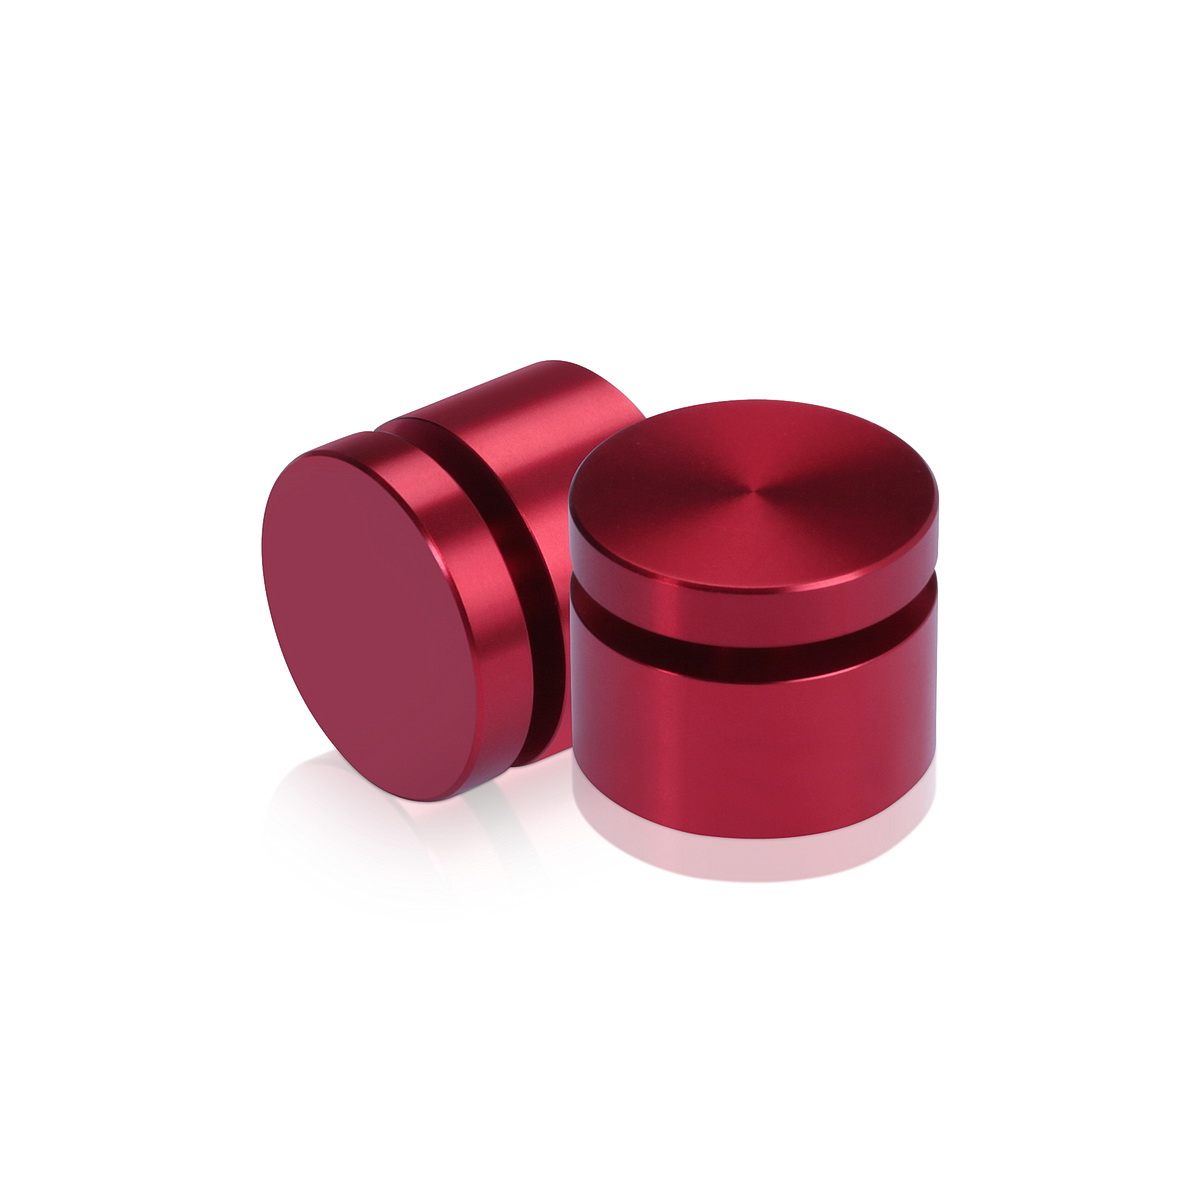 1'' Diameter X 1/2'' Barrel Length, Affordable Aluminum Standoffs, Cherry Red Anodized Finish Easy Fasten Standoff (For Inside / Outside use) [Required Material Hole Size: 7/16'']